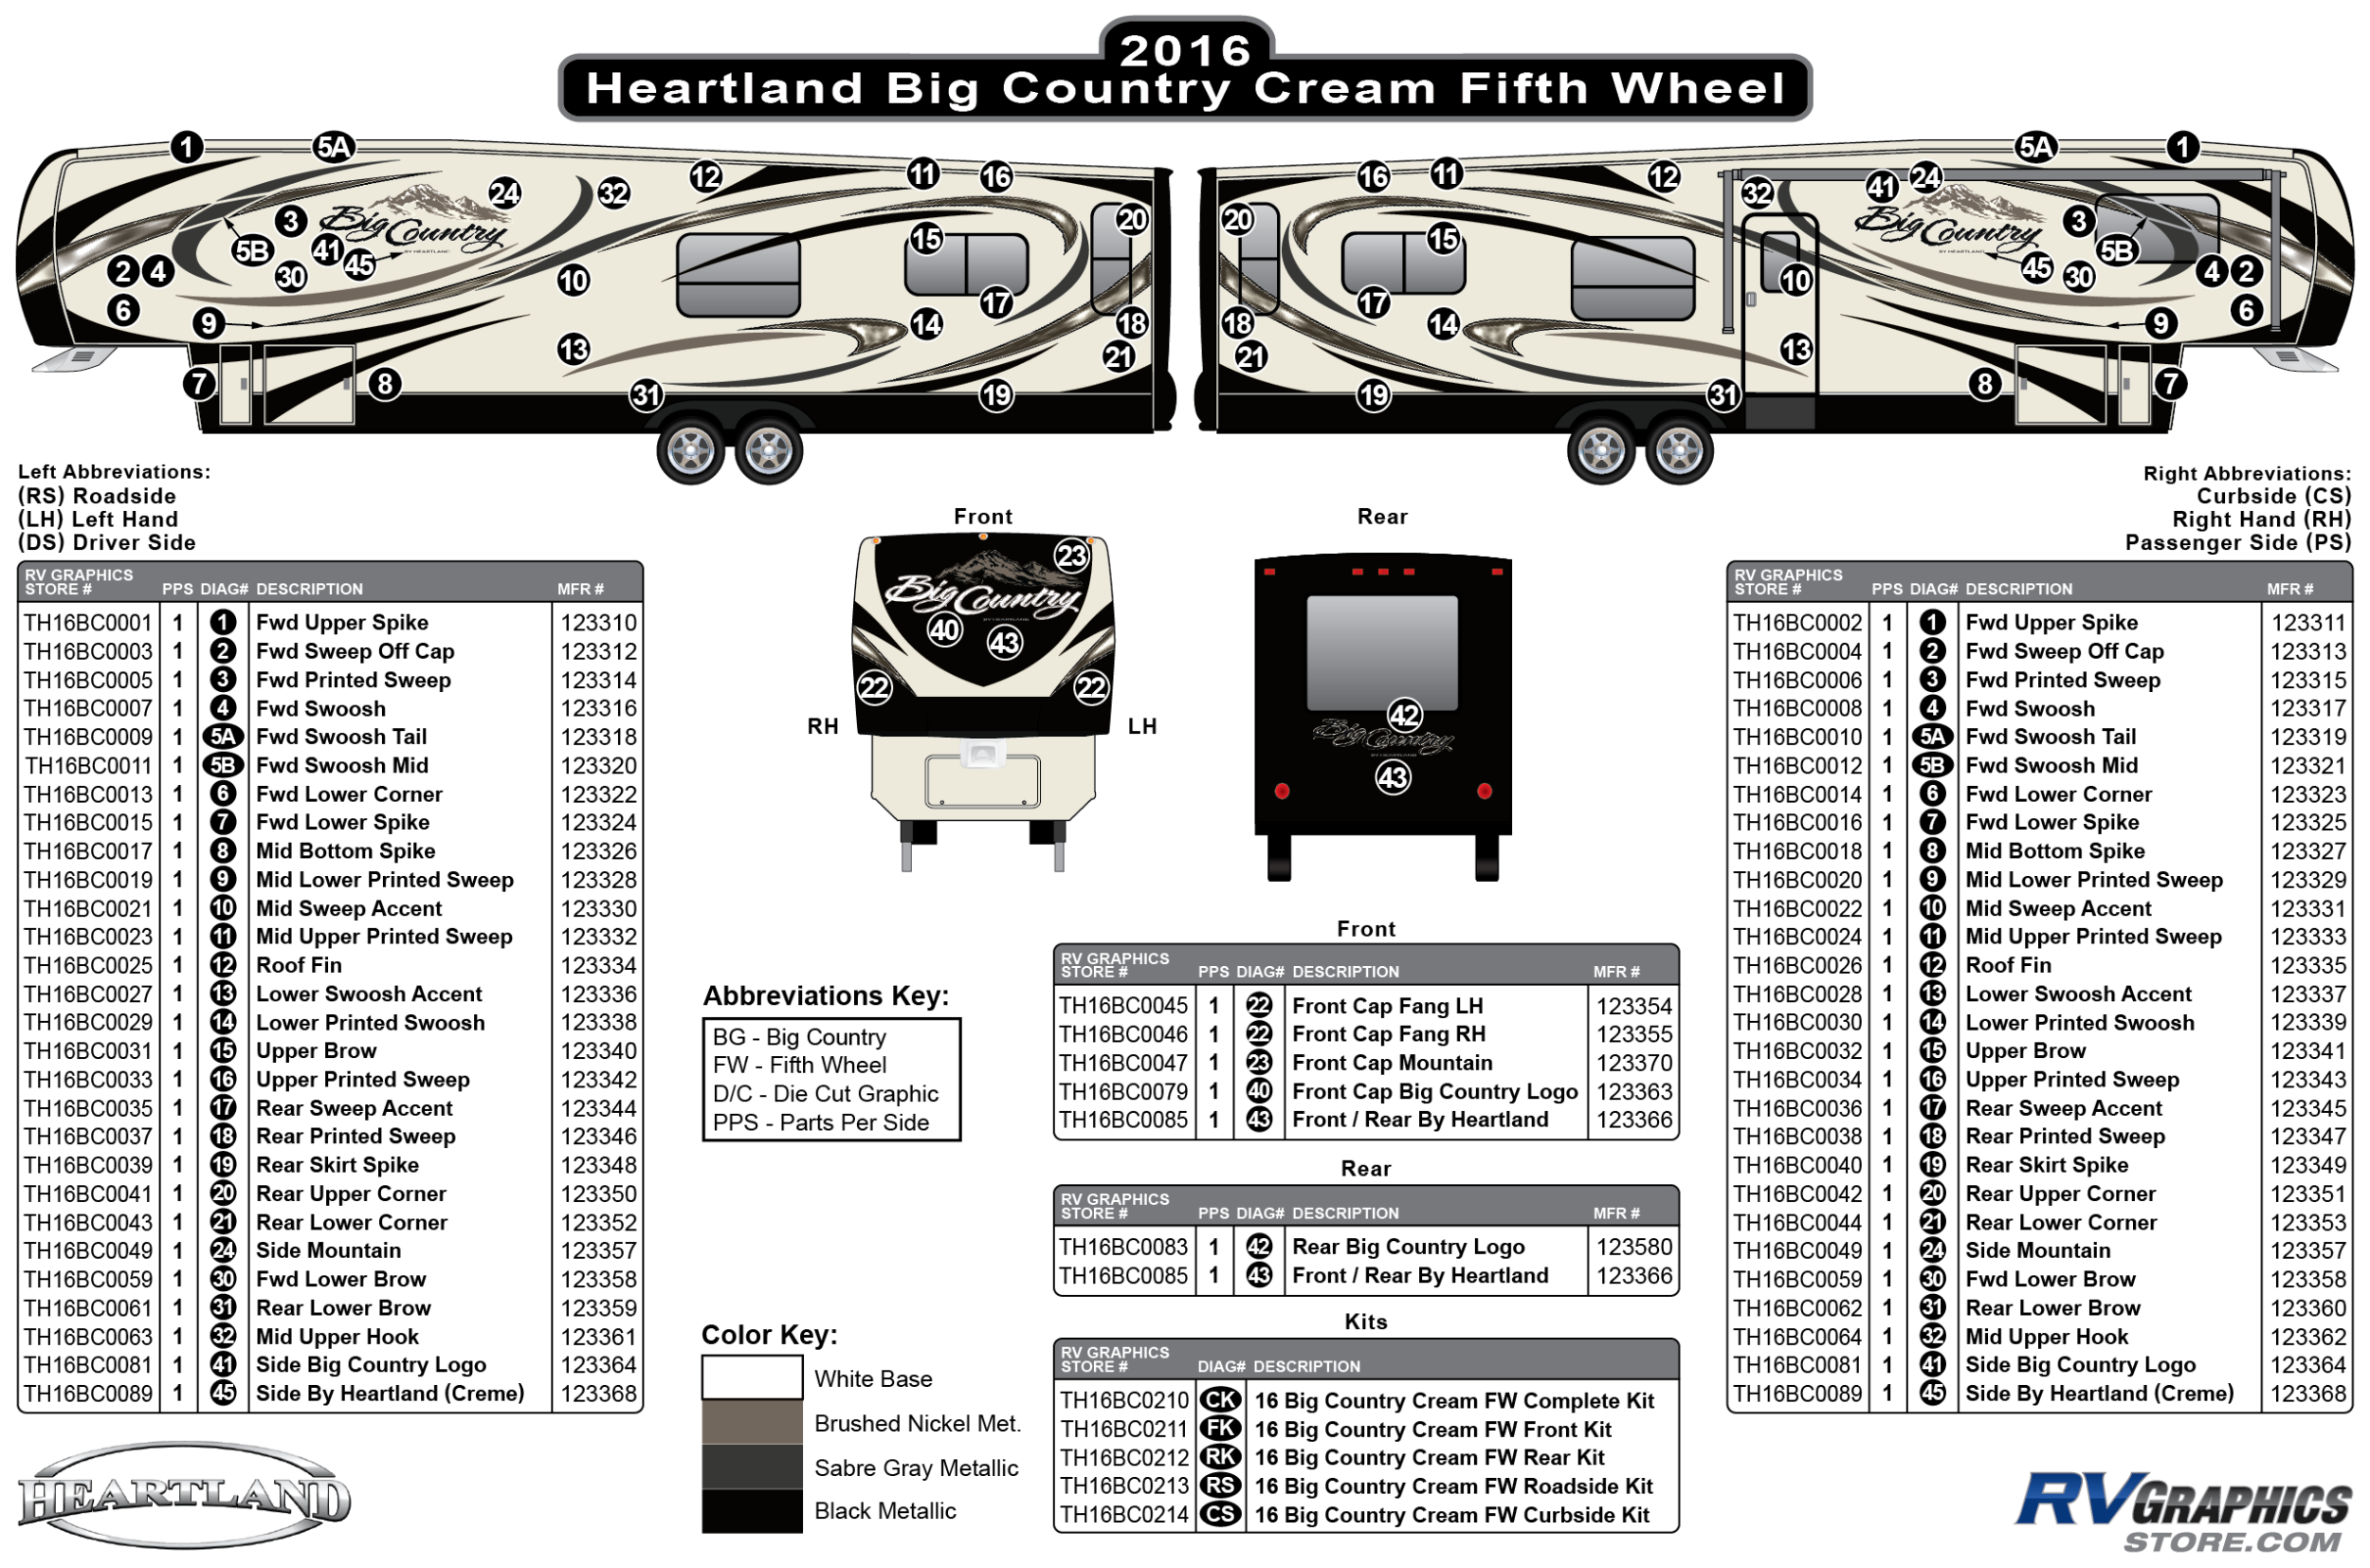 Big Country - 2016 Big Country  FW-Fifth Wheel Creme Wall Version